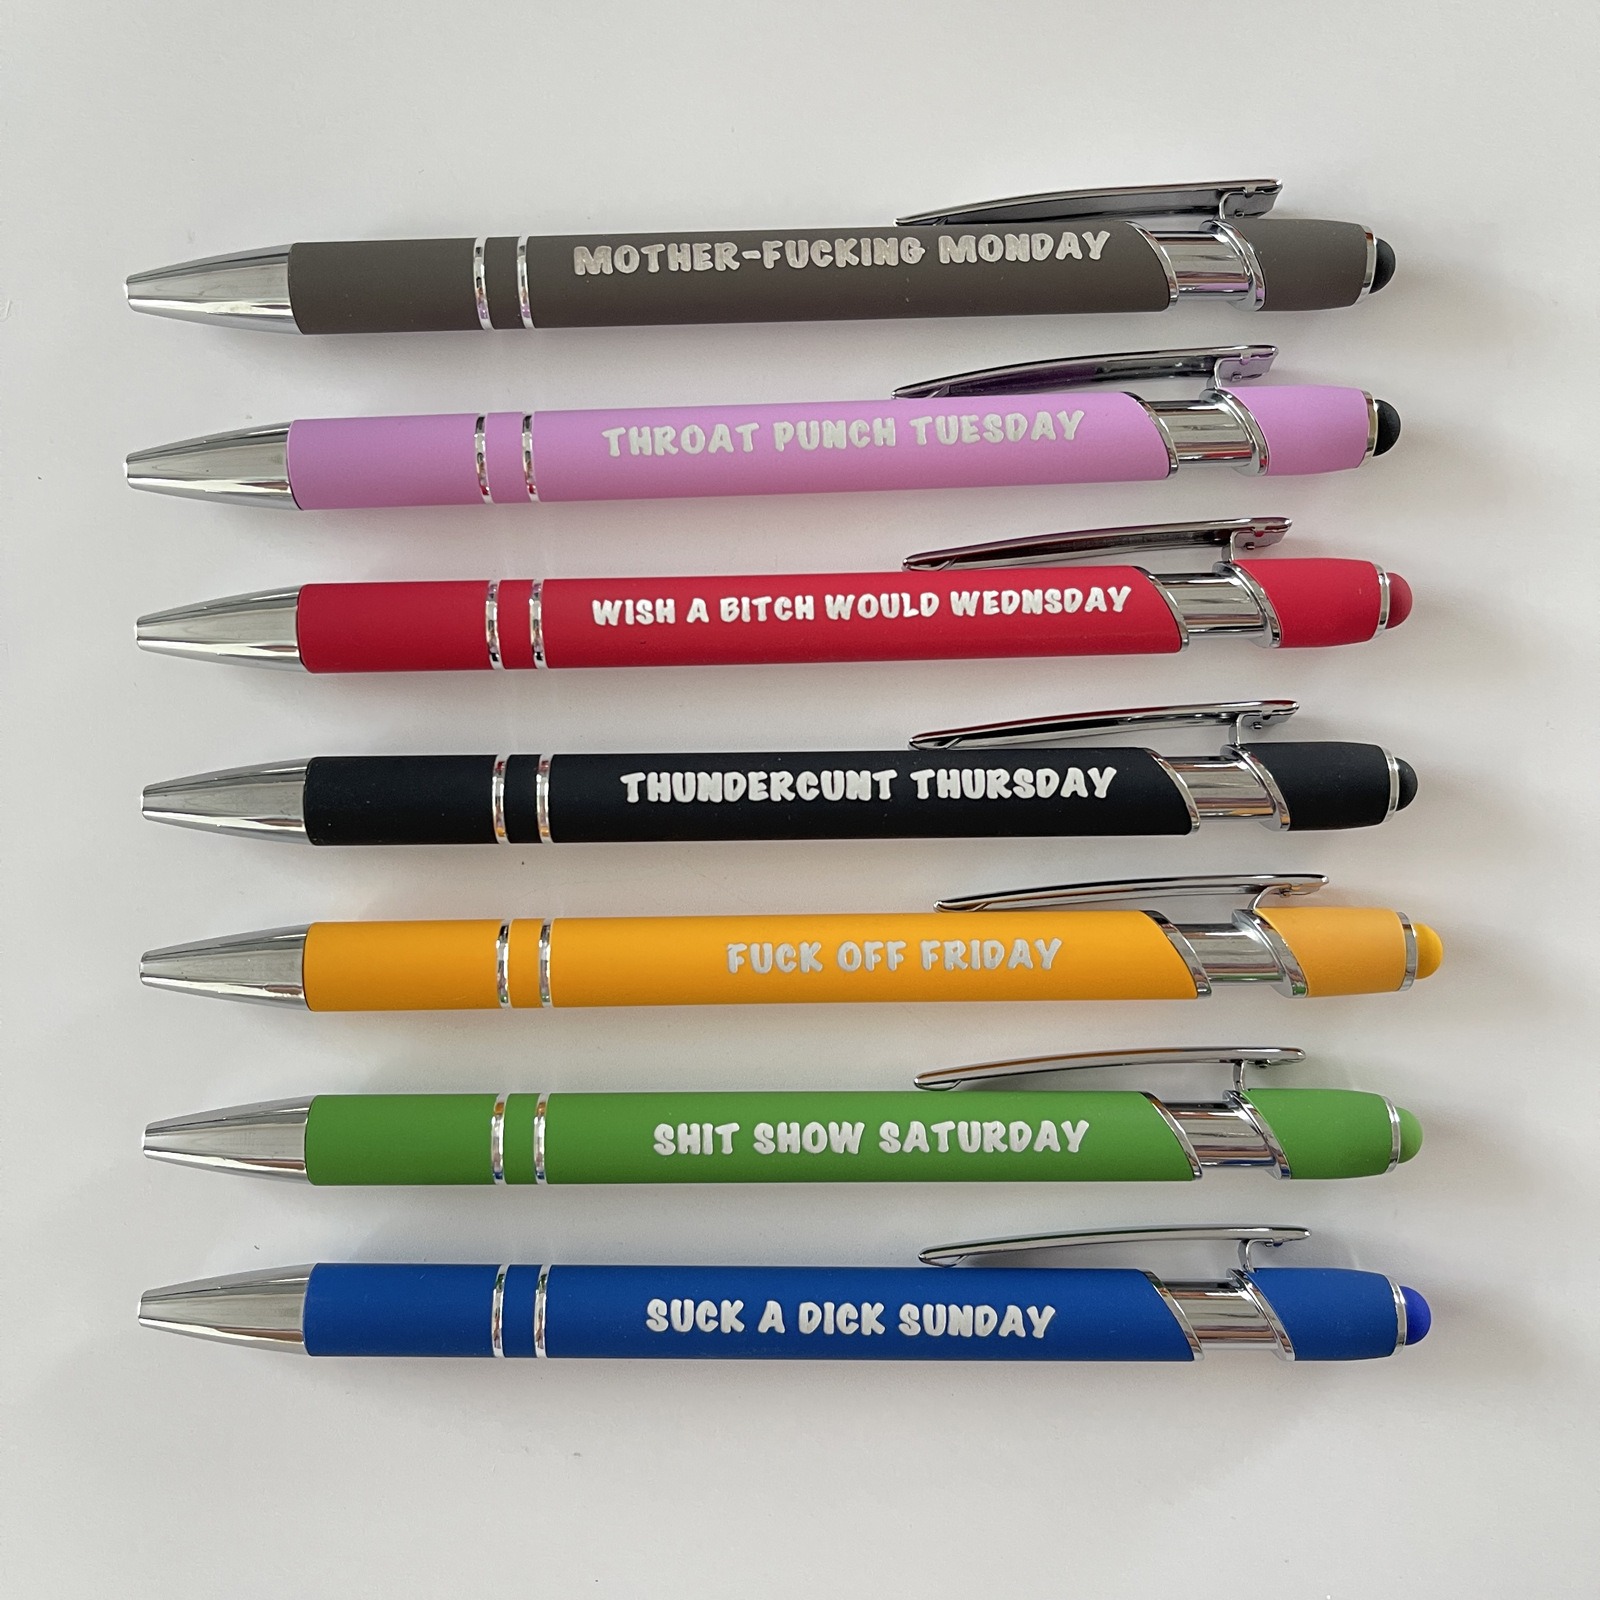 🎁FUNNY GIFT-A FUN SEVEN DAY MOOD PEN🖋️